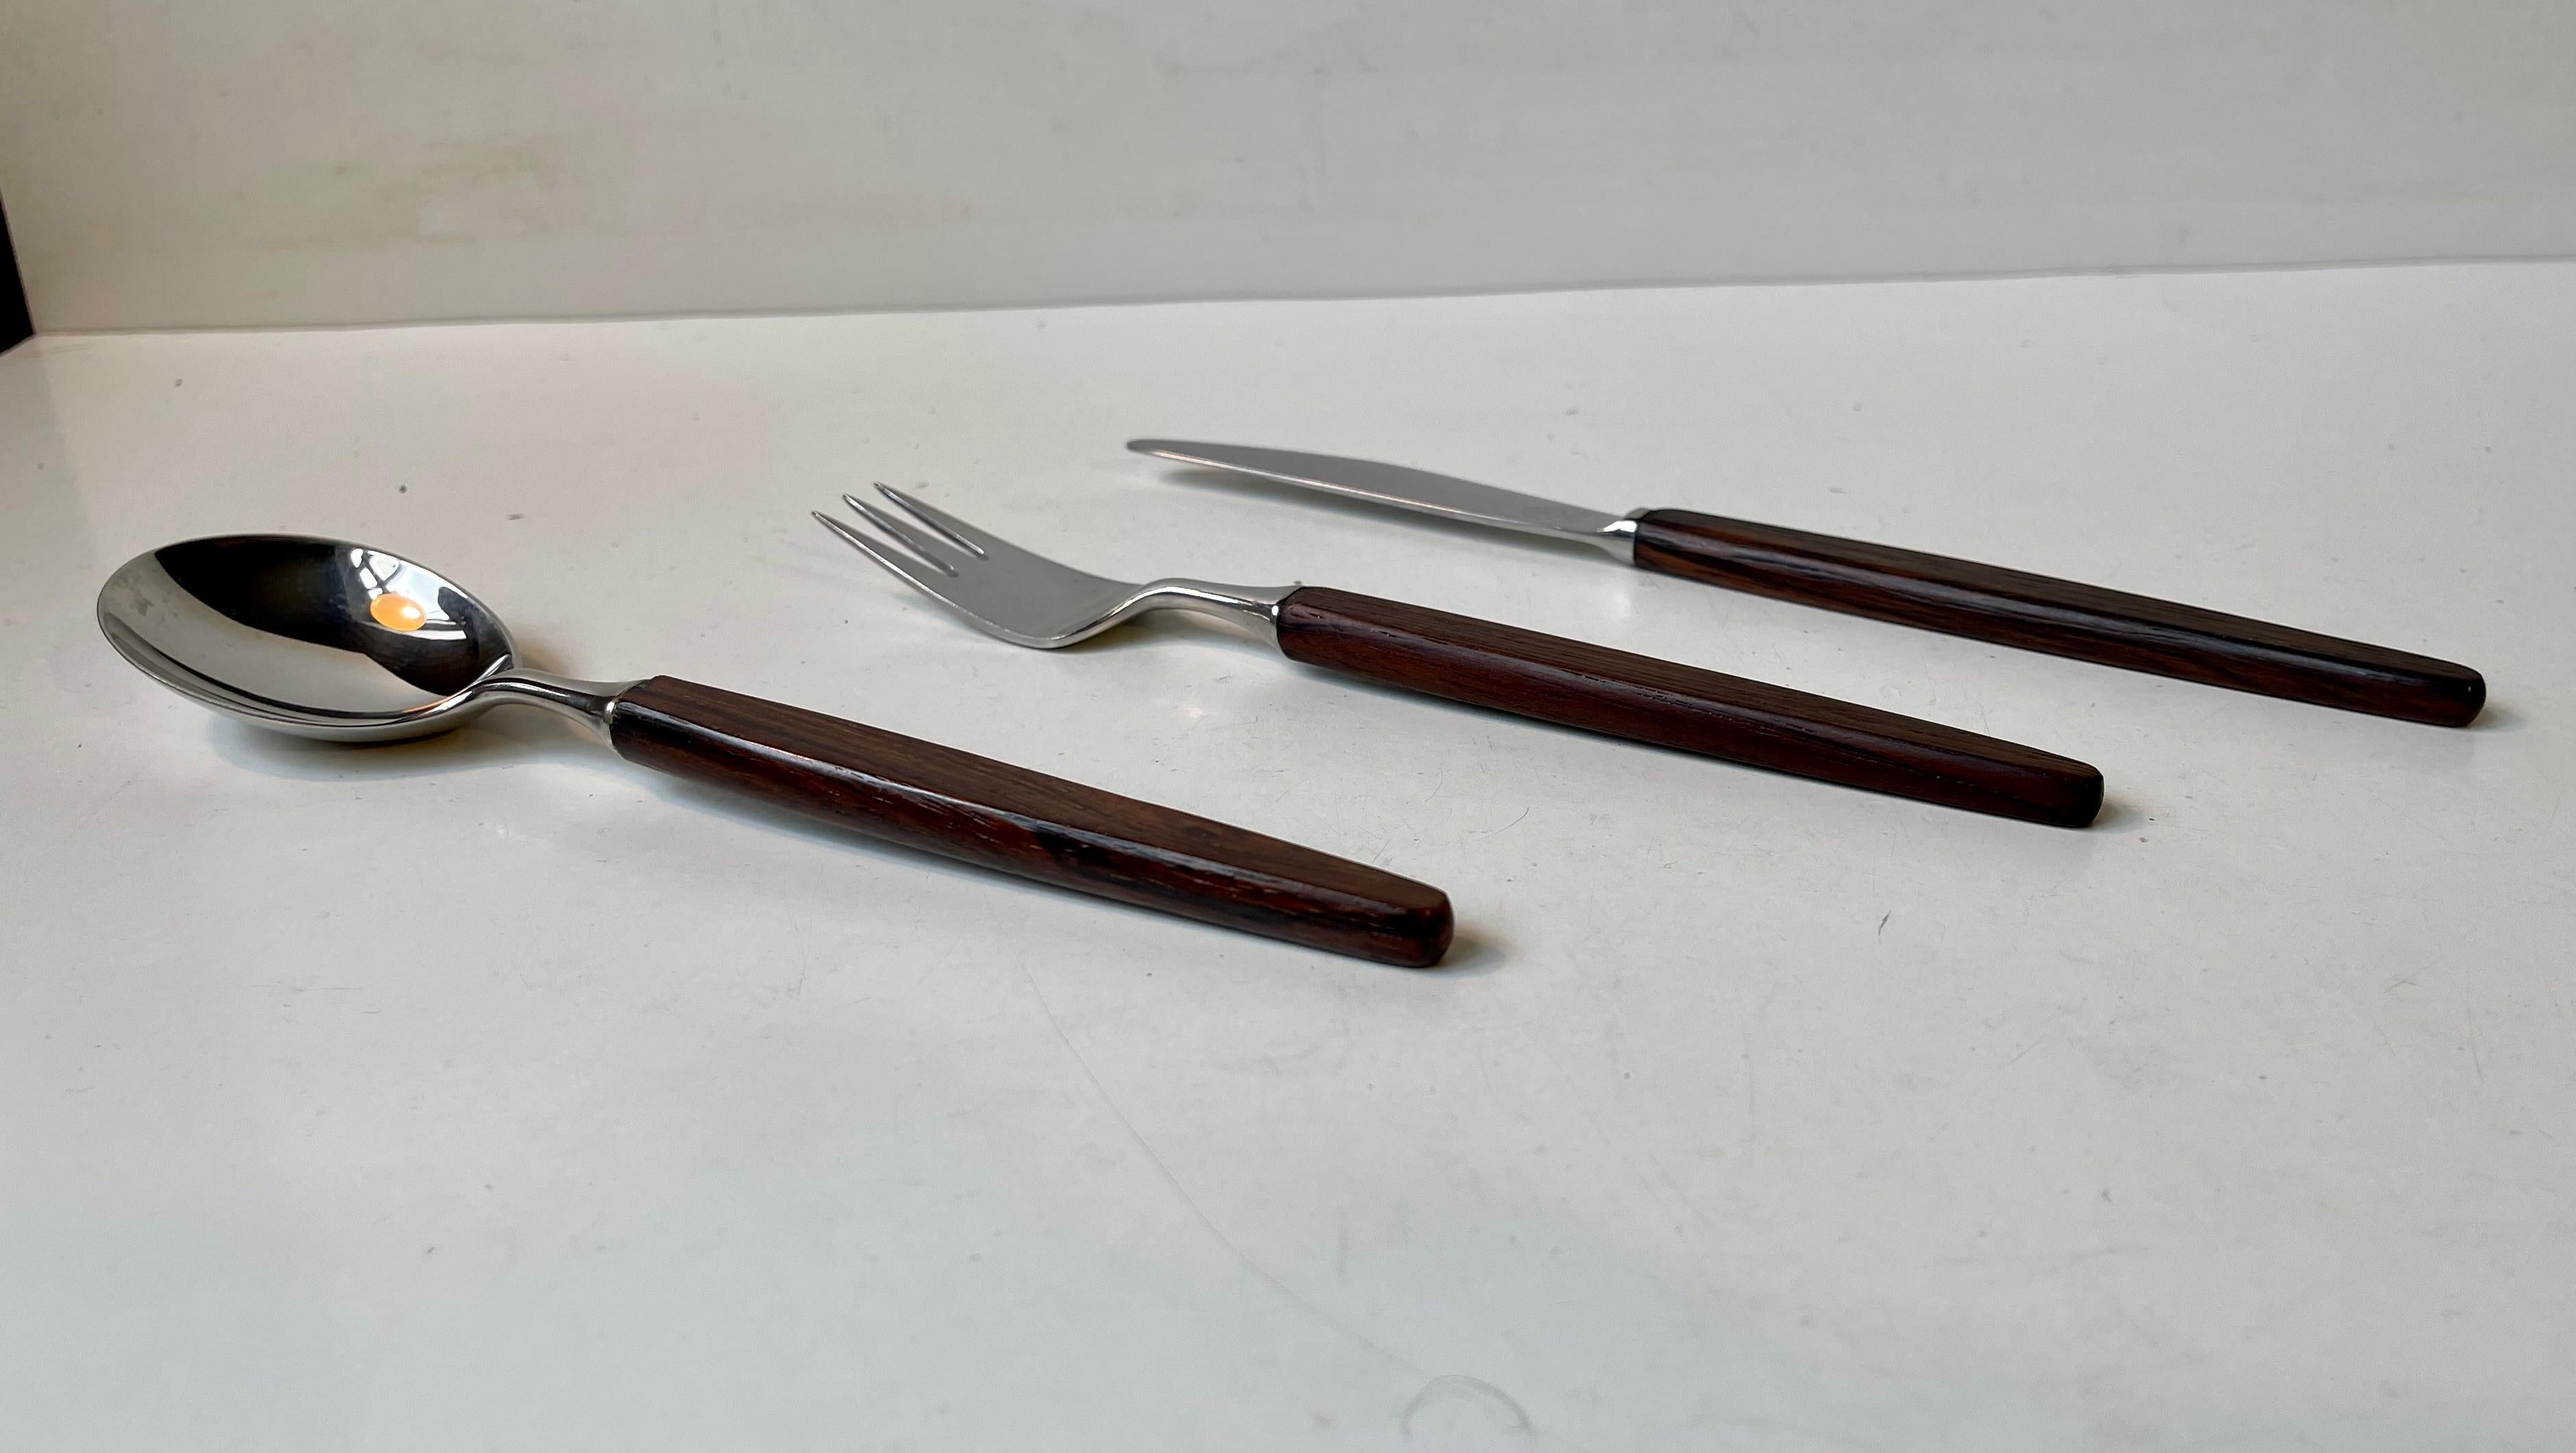 Iconic Scandinavian flatware dinner set for 12 persons. 12 dinner knives, 12 dinner forks and 12 soup spoons. Designed by Norwegian industrial designer Tias Eckhoff circa 1960 and made by Dansk Knivevarefabrik/Lundtofte during the 1960s. Made from